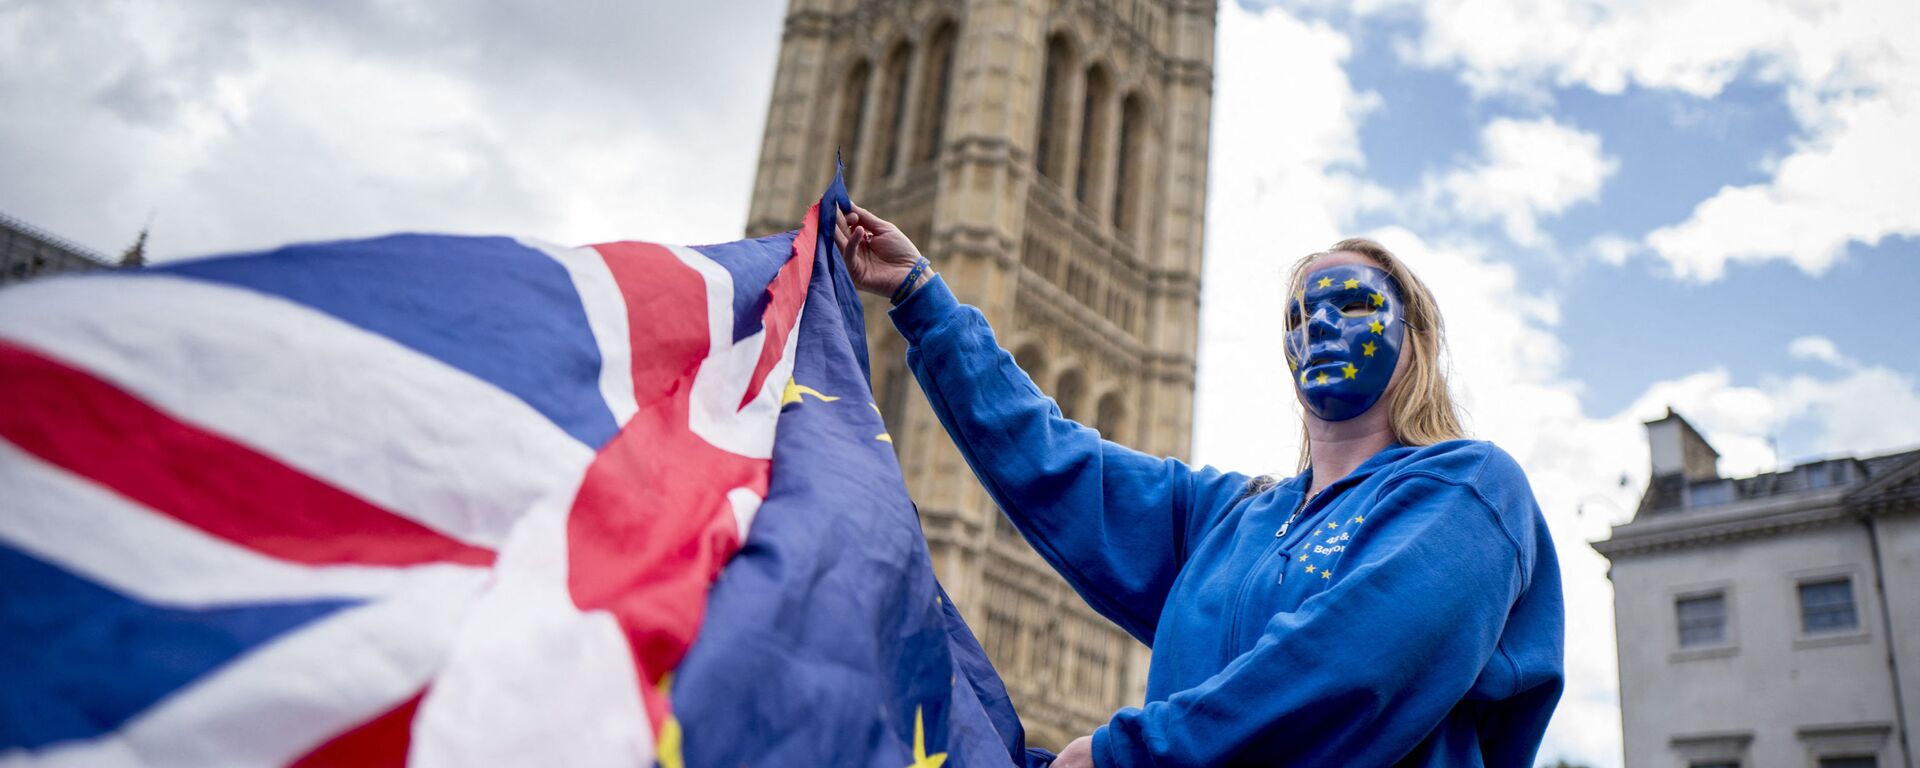 A Pro-European Union protester holds Union and European flags in front of the Victoria Tower at The Palace of Westminster in central London on September 13, 2017, ahead of a rally to warn about the terms of Brexit, by EU nationals in Britain and UK nationals in Europe - Sputnik International, 1920, 05.07.2021